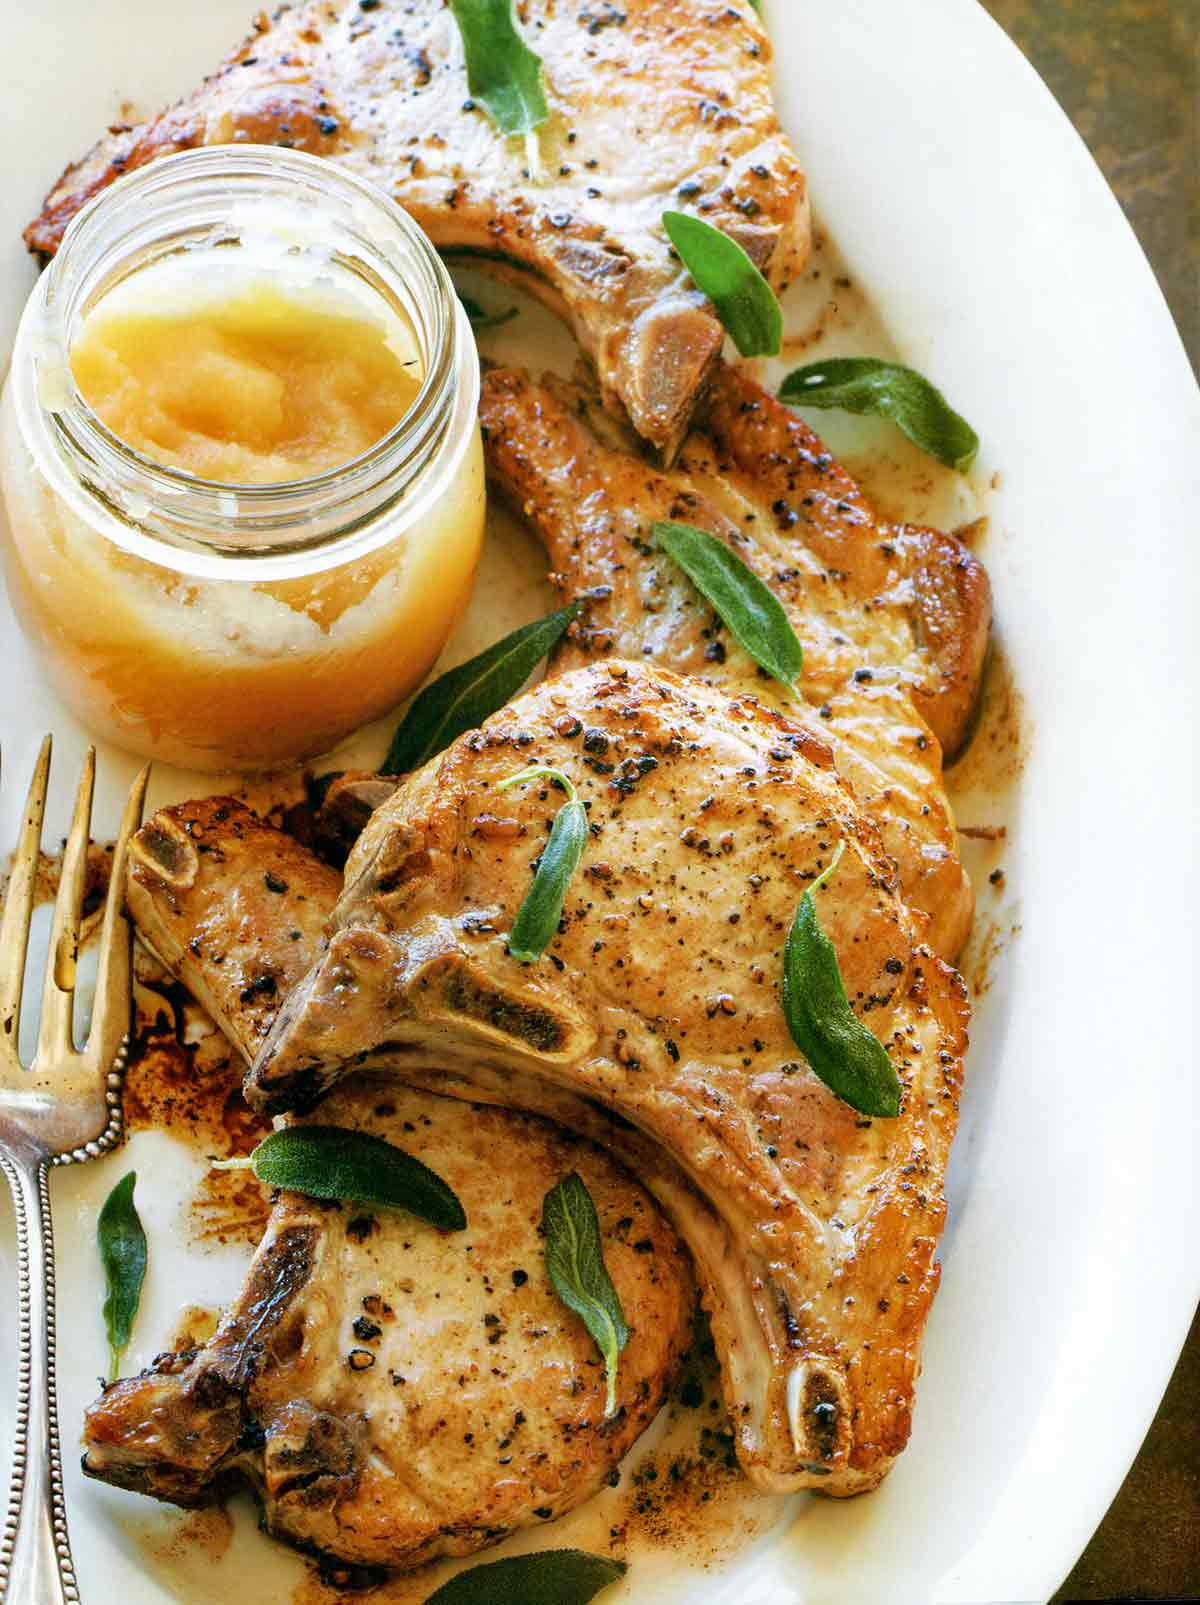 A white platter with four pork chops with applesauce in a jar on the side and fried sage leaves sprinkled over the pork chops.